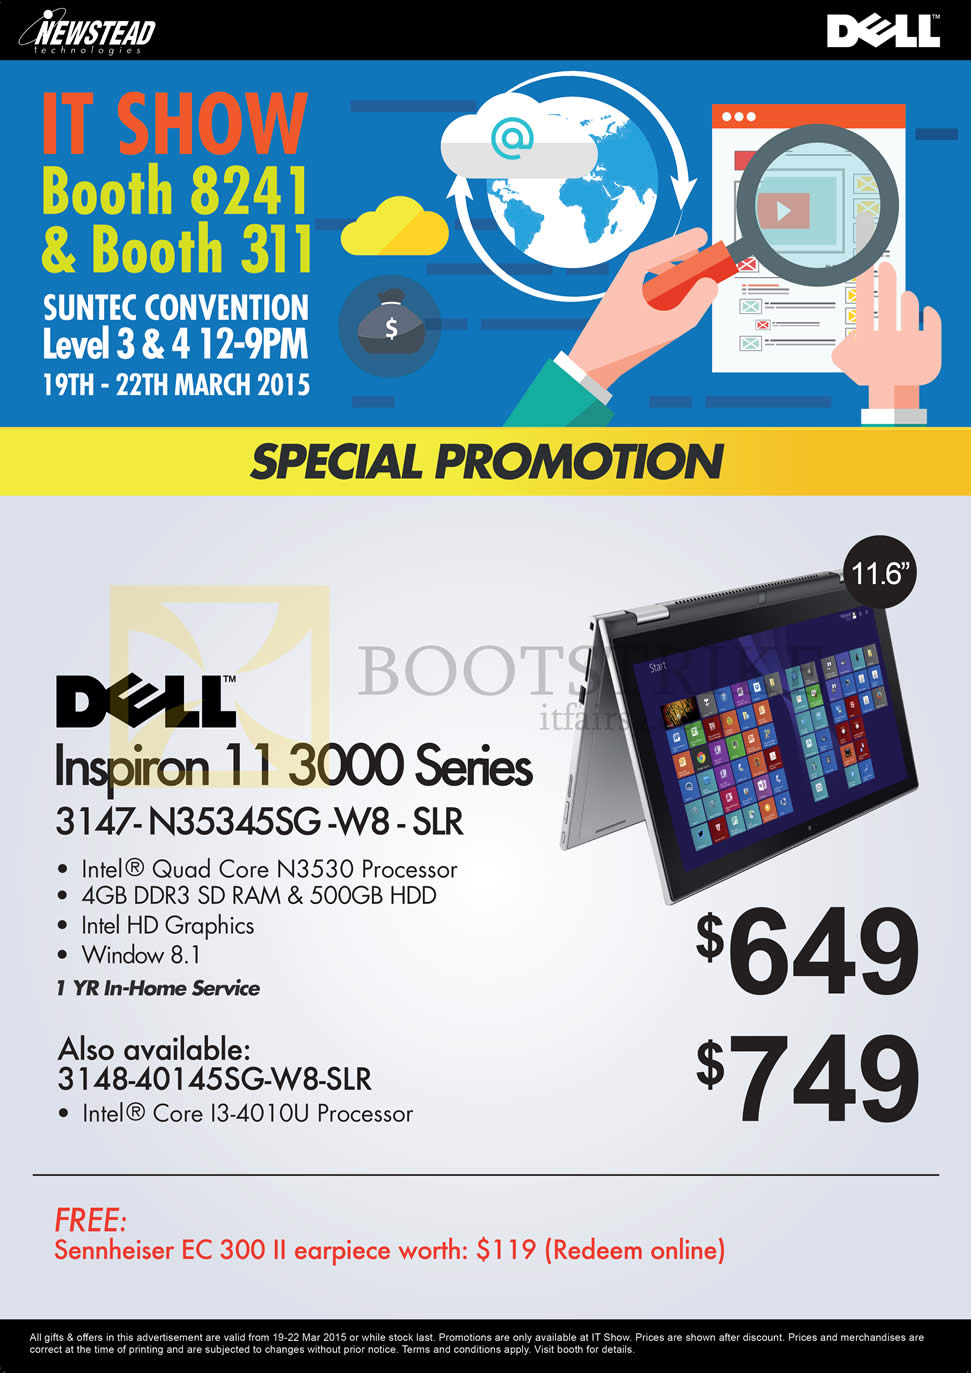 IT SHOW 2015 price list image brochure of Dell Newstead Inspiron 11 3000 Series Notebook